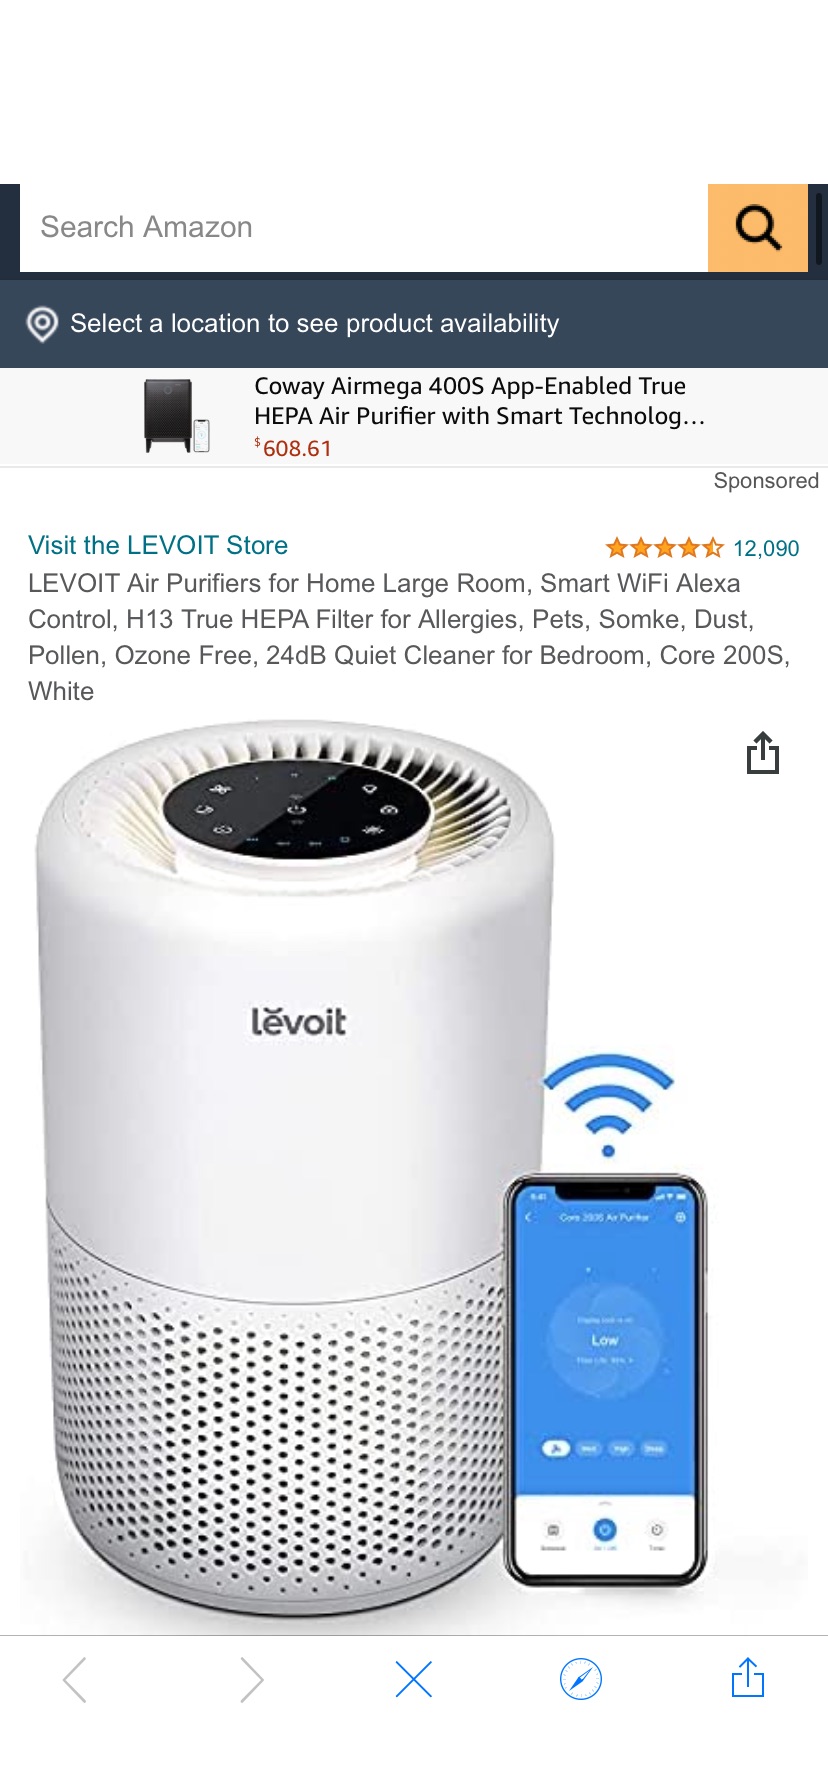 LEVOIT 空气净化器 Air Purifiers for Home Large Room, Smart WiFi Alexa Control, H13 True HEPA Filter for Allergies, Pets, Somke, Dust, Pollen, Ozone Free, 24dB Quiet Cleaner for Bedroom, Core 200S, White :